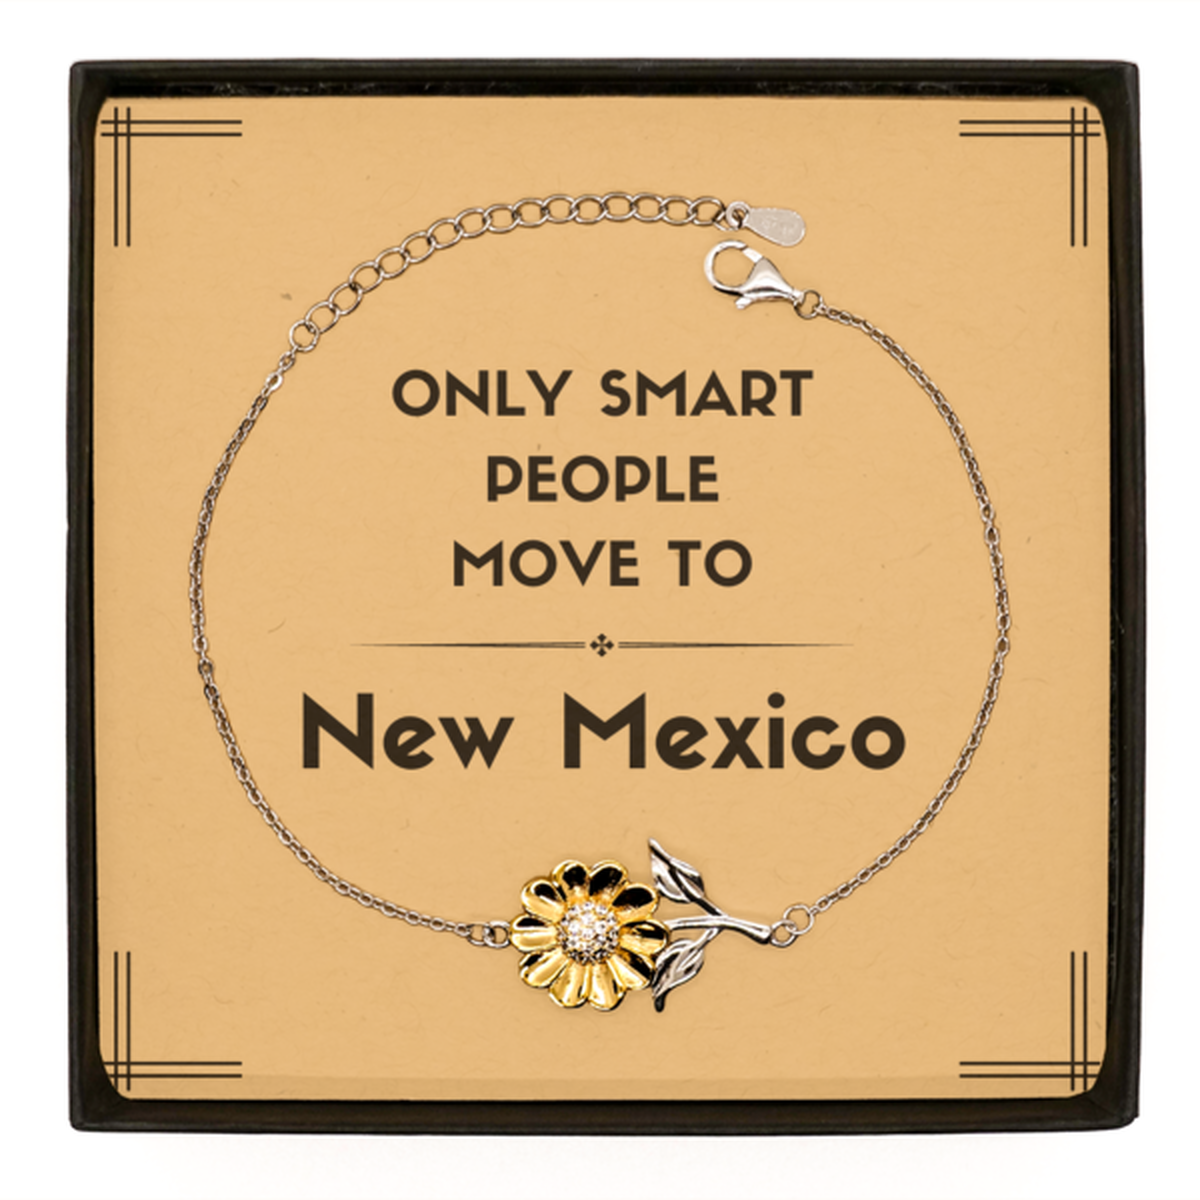 Only smart people move to New Mexico Sunflower Bracelet, Message Card Gifts For New Mexico, Move to New Mexico Gifts for Friends Coworker Funny Saying Quote